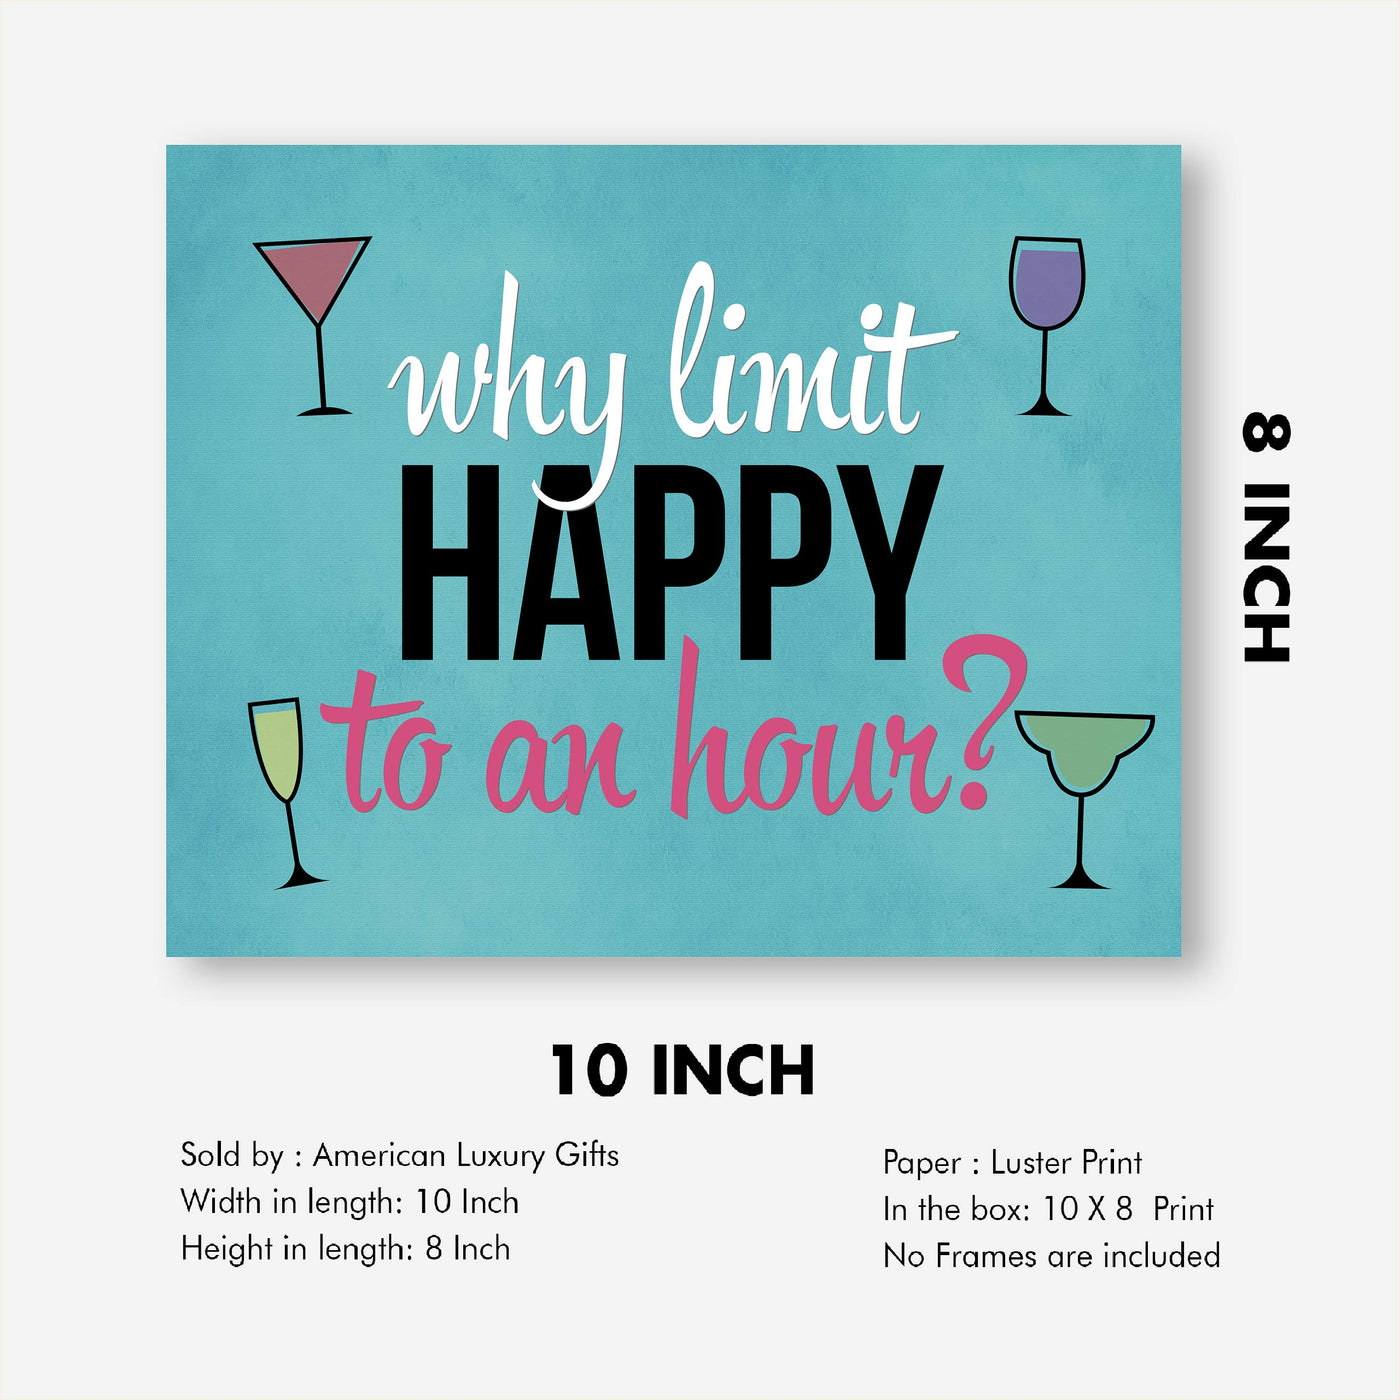 Why Limit Happy To An Hour Funny Bar Sign Decor-10 x 8" Typographic Wall Art Print w/Drinking Glass Images-Ready to Frame. Humorous Home-Kitchen-Patio-Shop-Cave Decor. Great Gift for Friends!